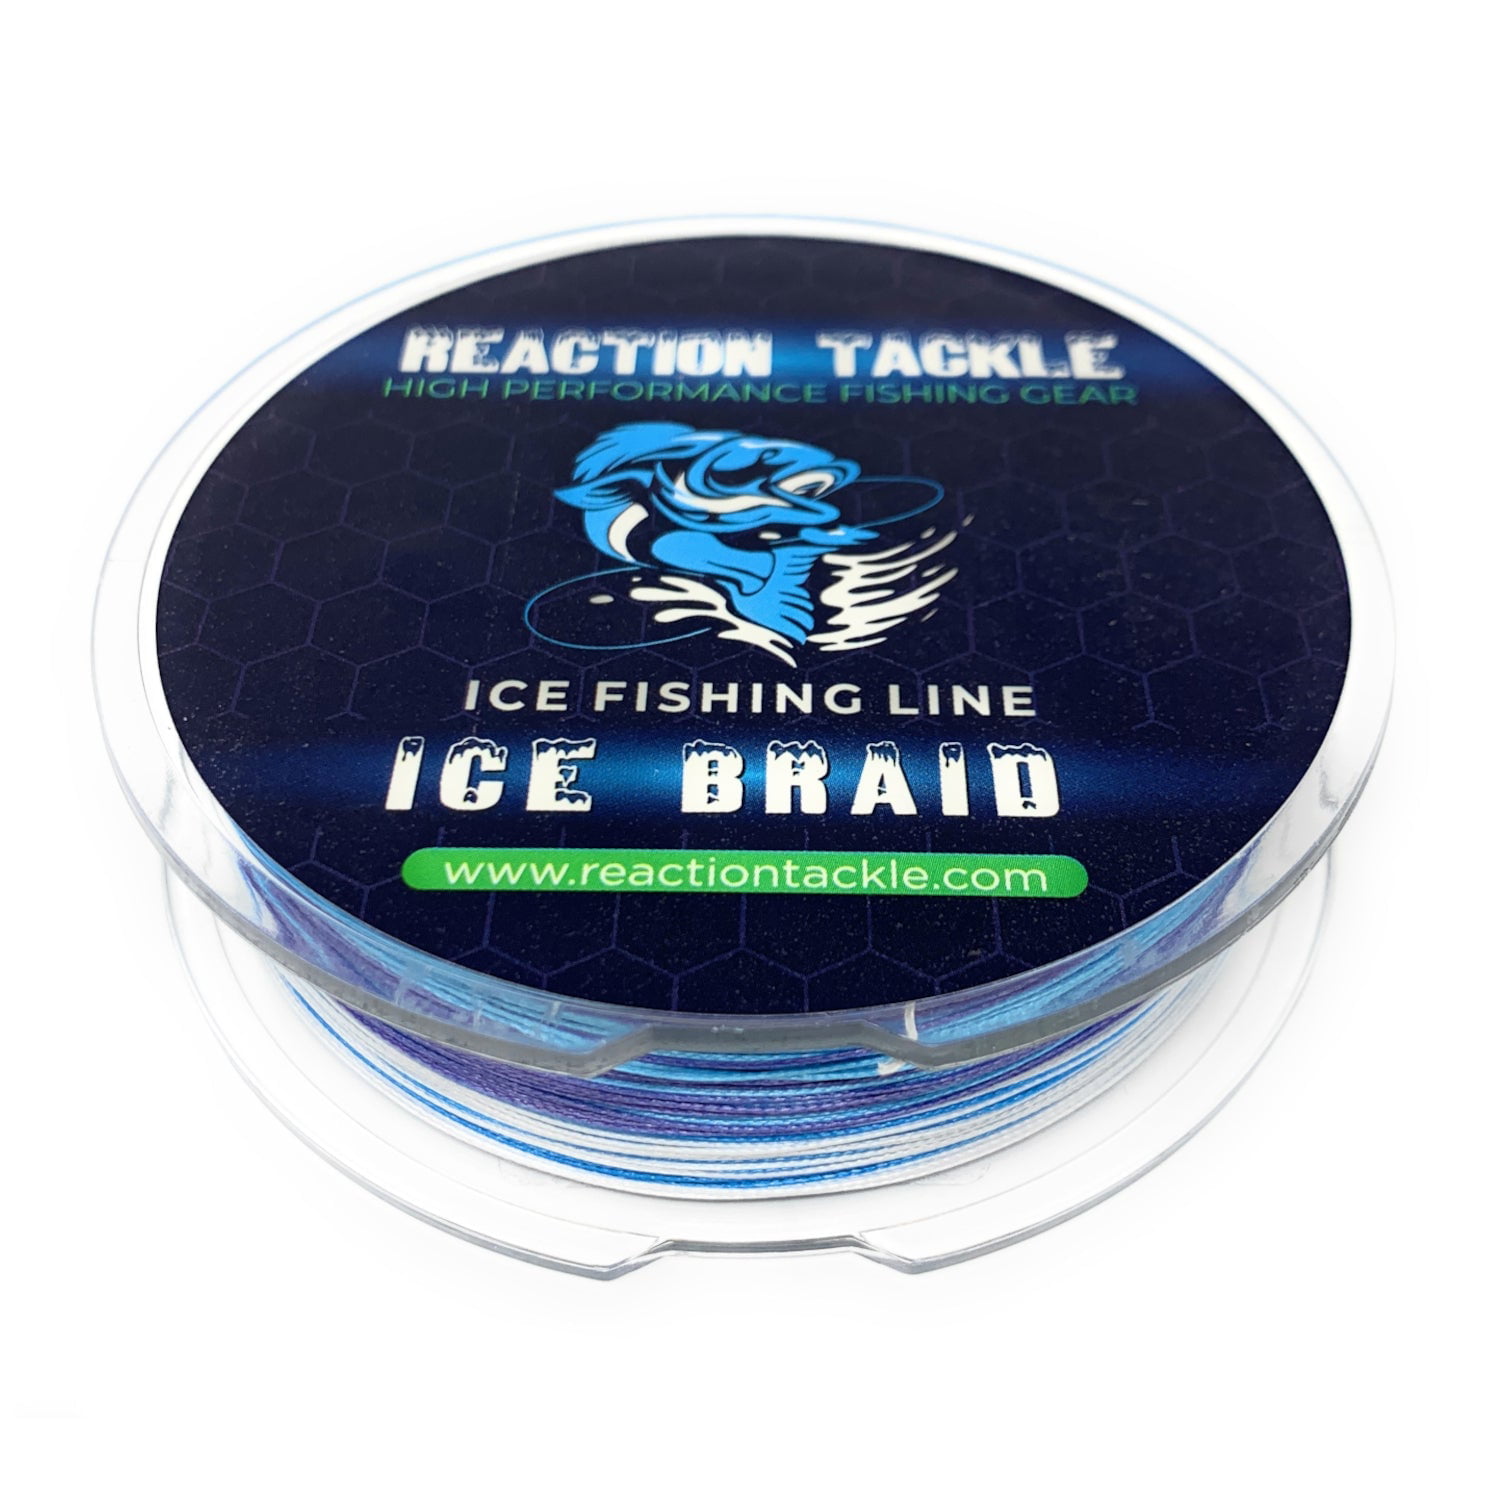 Reaction Tackle Ice Fishing Braided Line - 8 strand Professional Grade